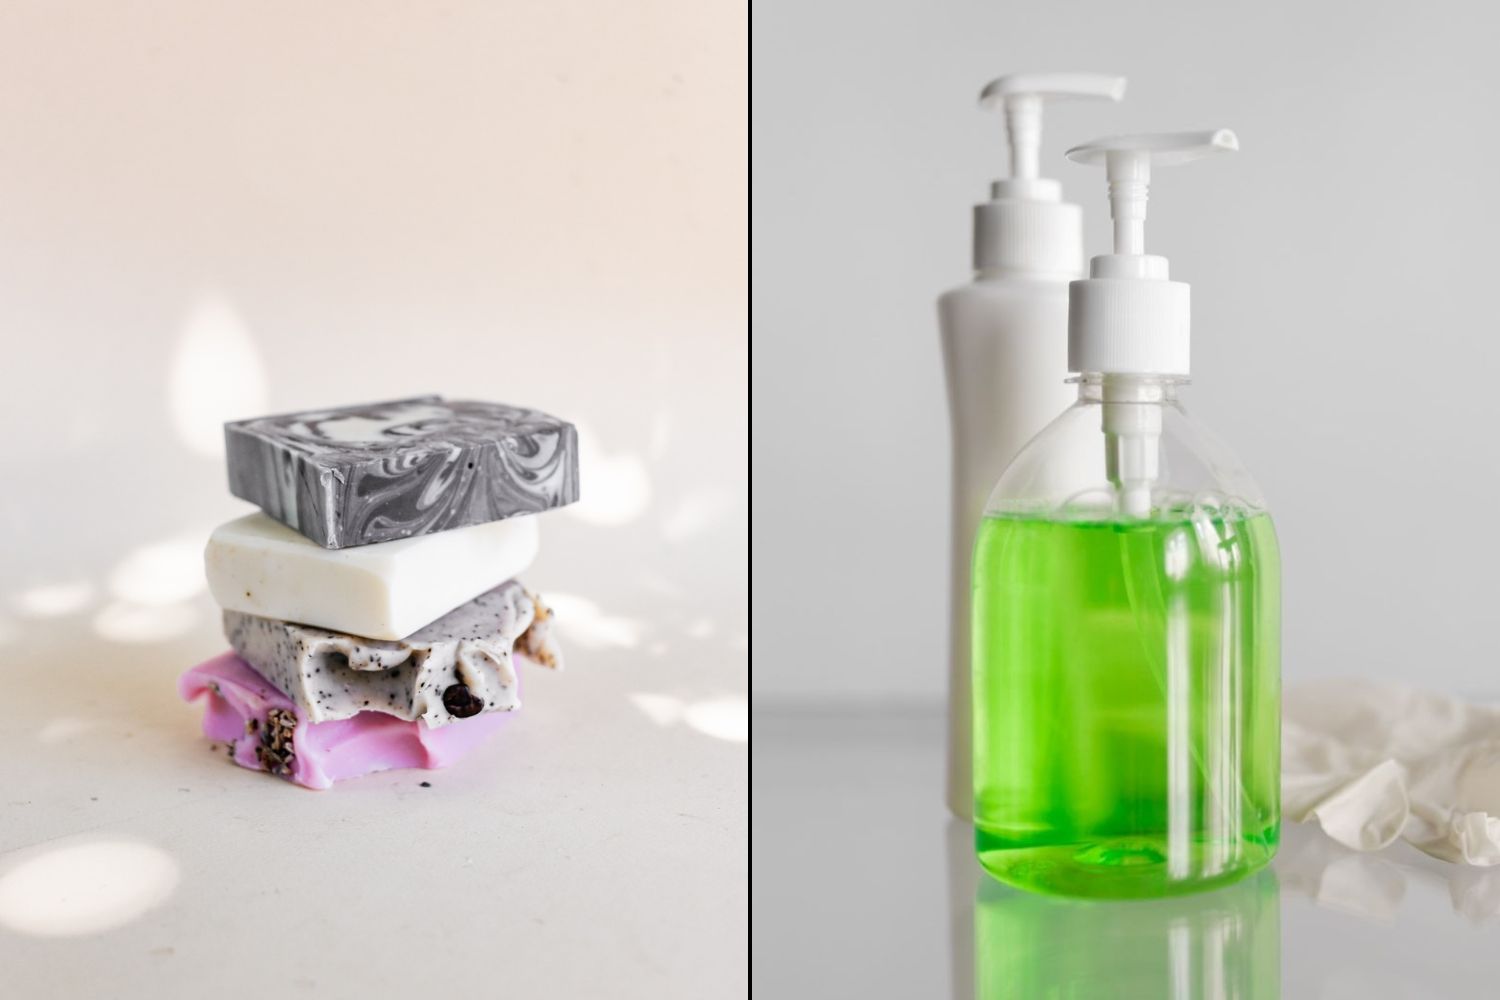 Bar Soap Vs. Body Wash: Which is Better for the Health of Your Skin?